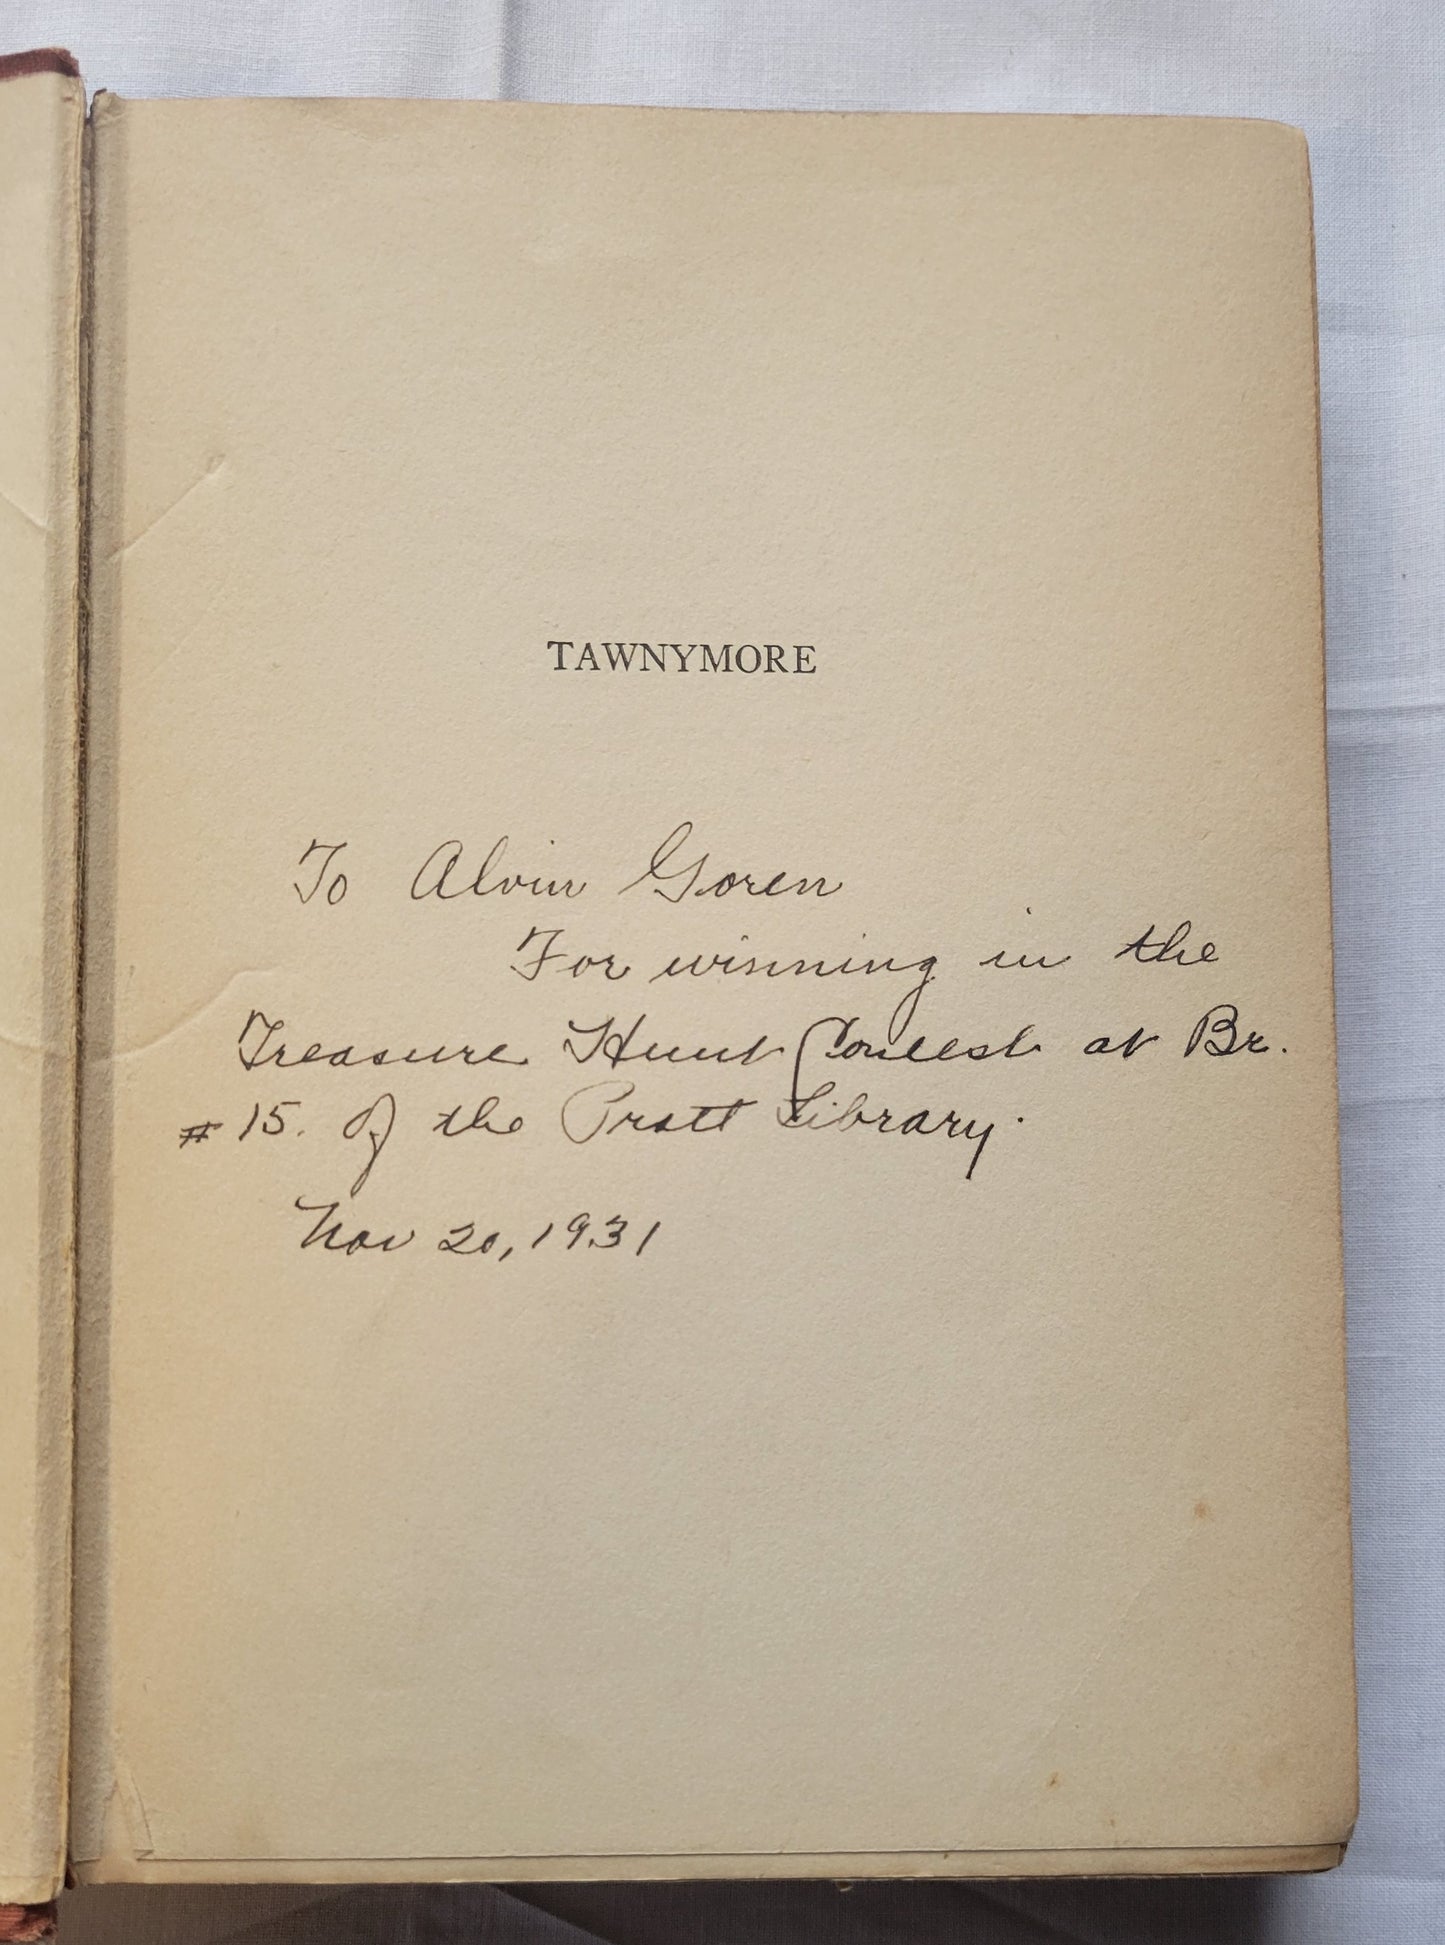 Vintage book for sale “Tawnymore” by Monica Shannon, illustrated by Jean Charlot, published by Doubleday, Doran, & Company in 1931.  Hand written note